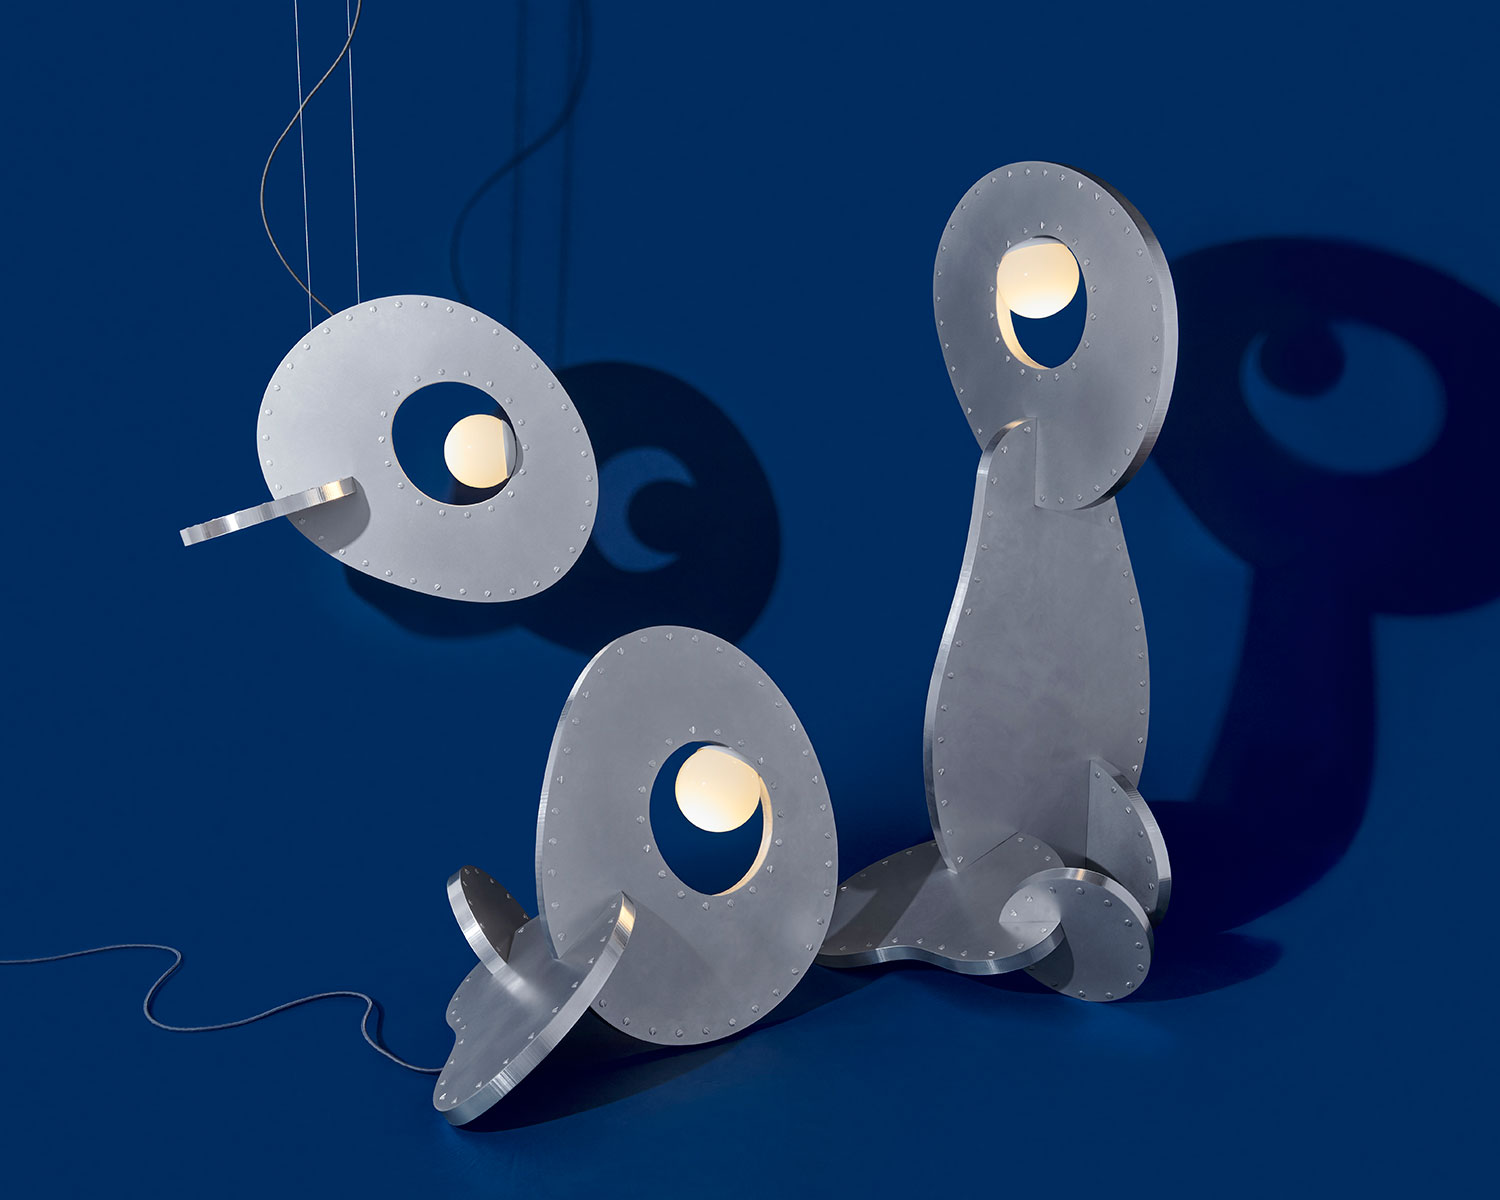 Round metal lamps on a navy blue background